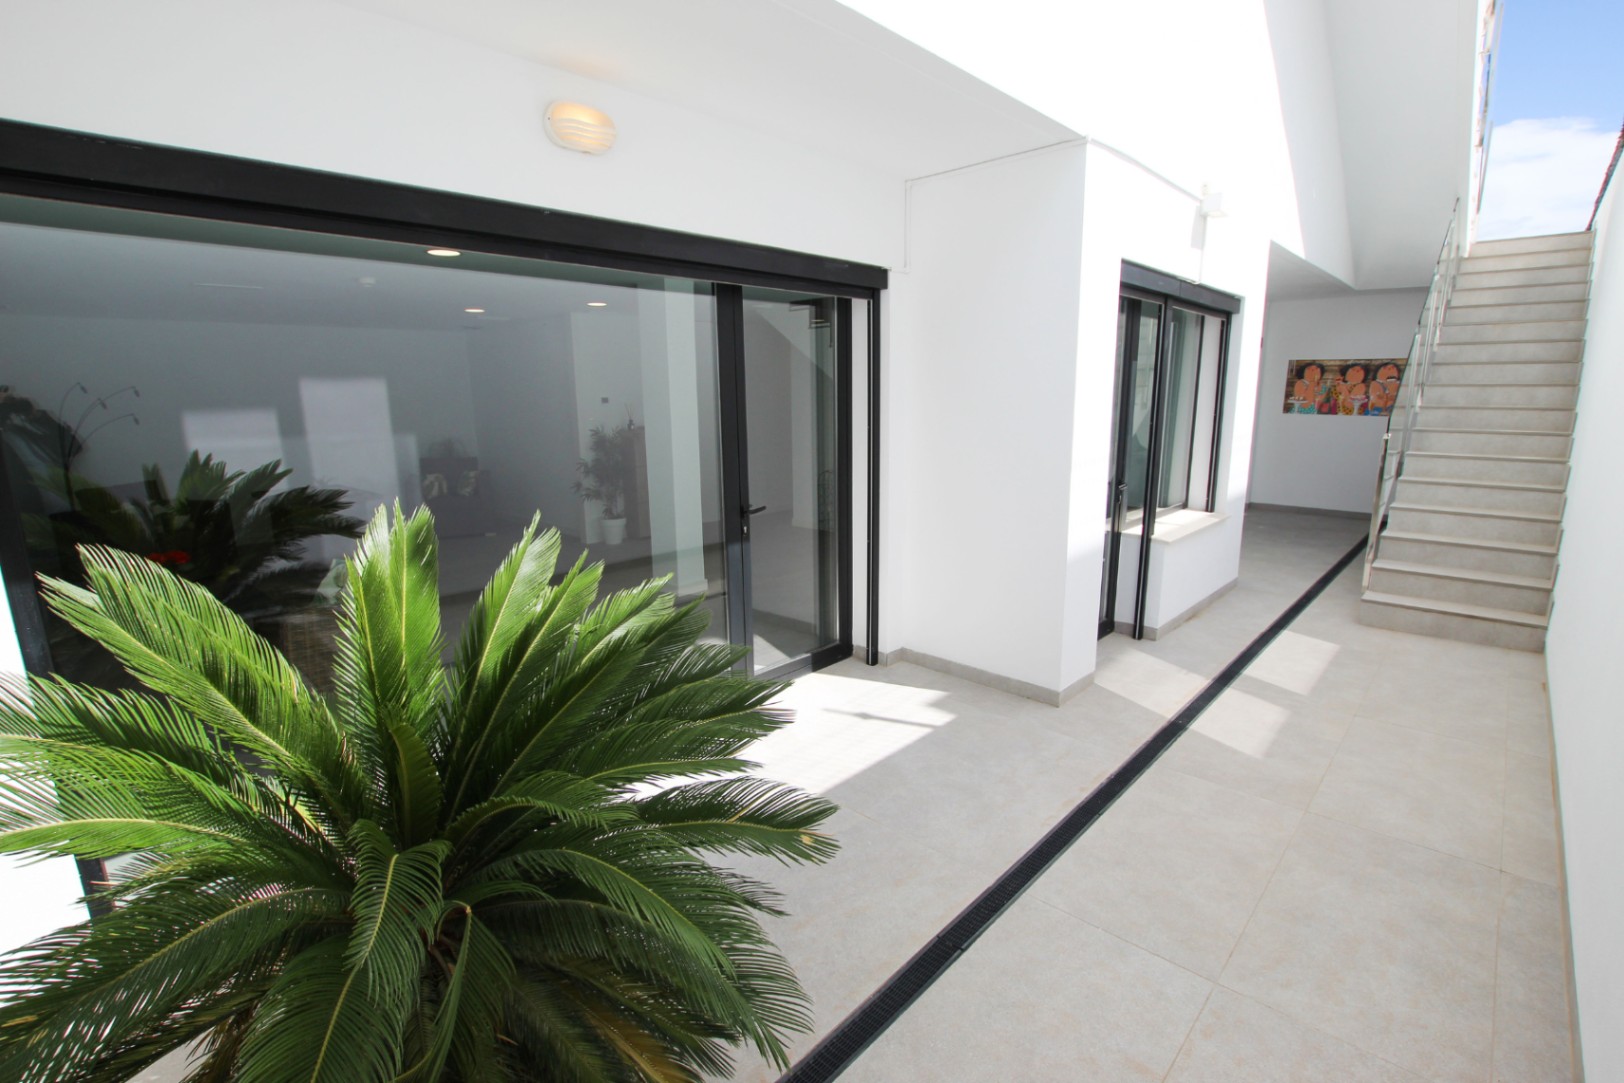 Finestrat: Ideally located new build villa with private pool